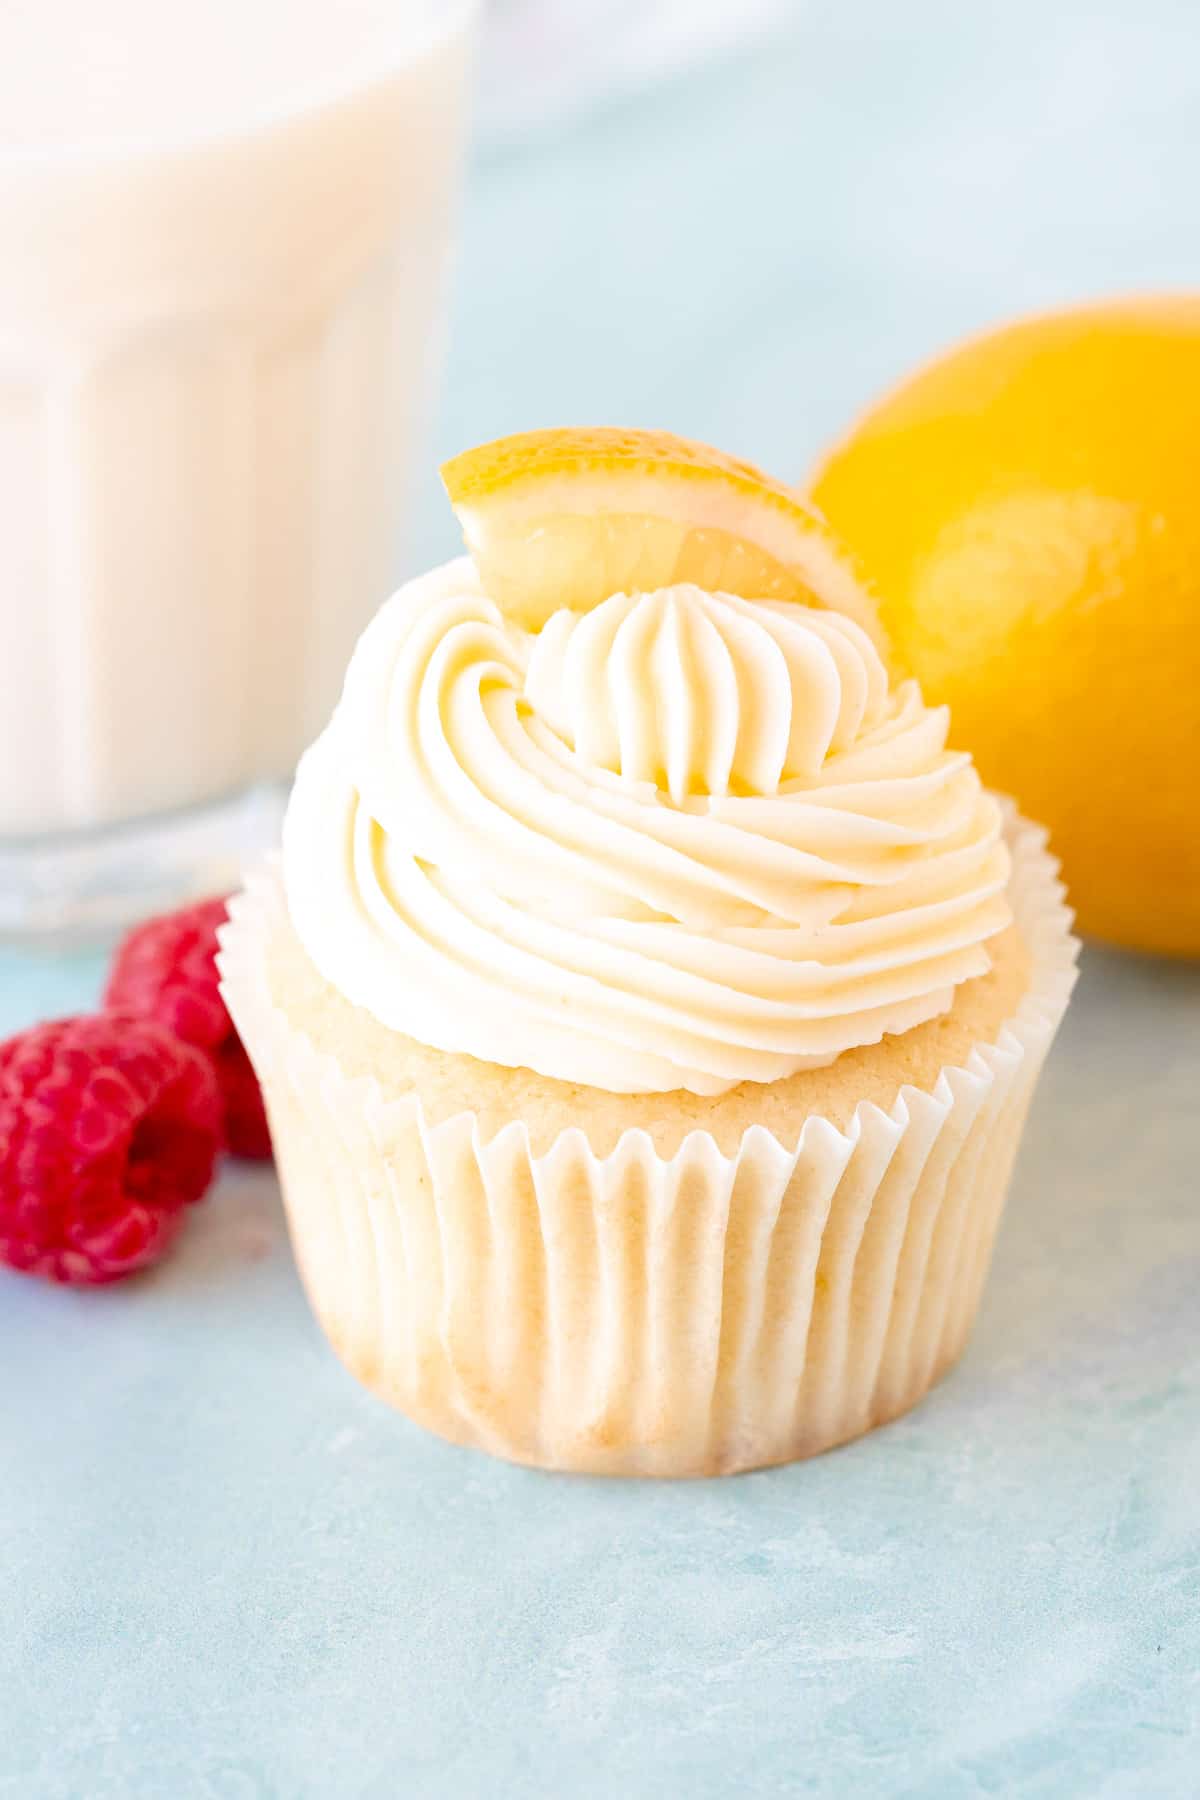 Lemon cupcake with lemon frosting with glass of milk